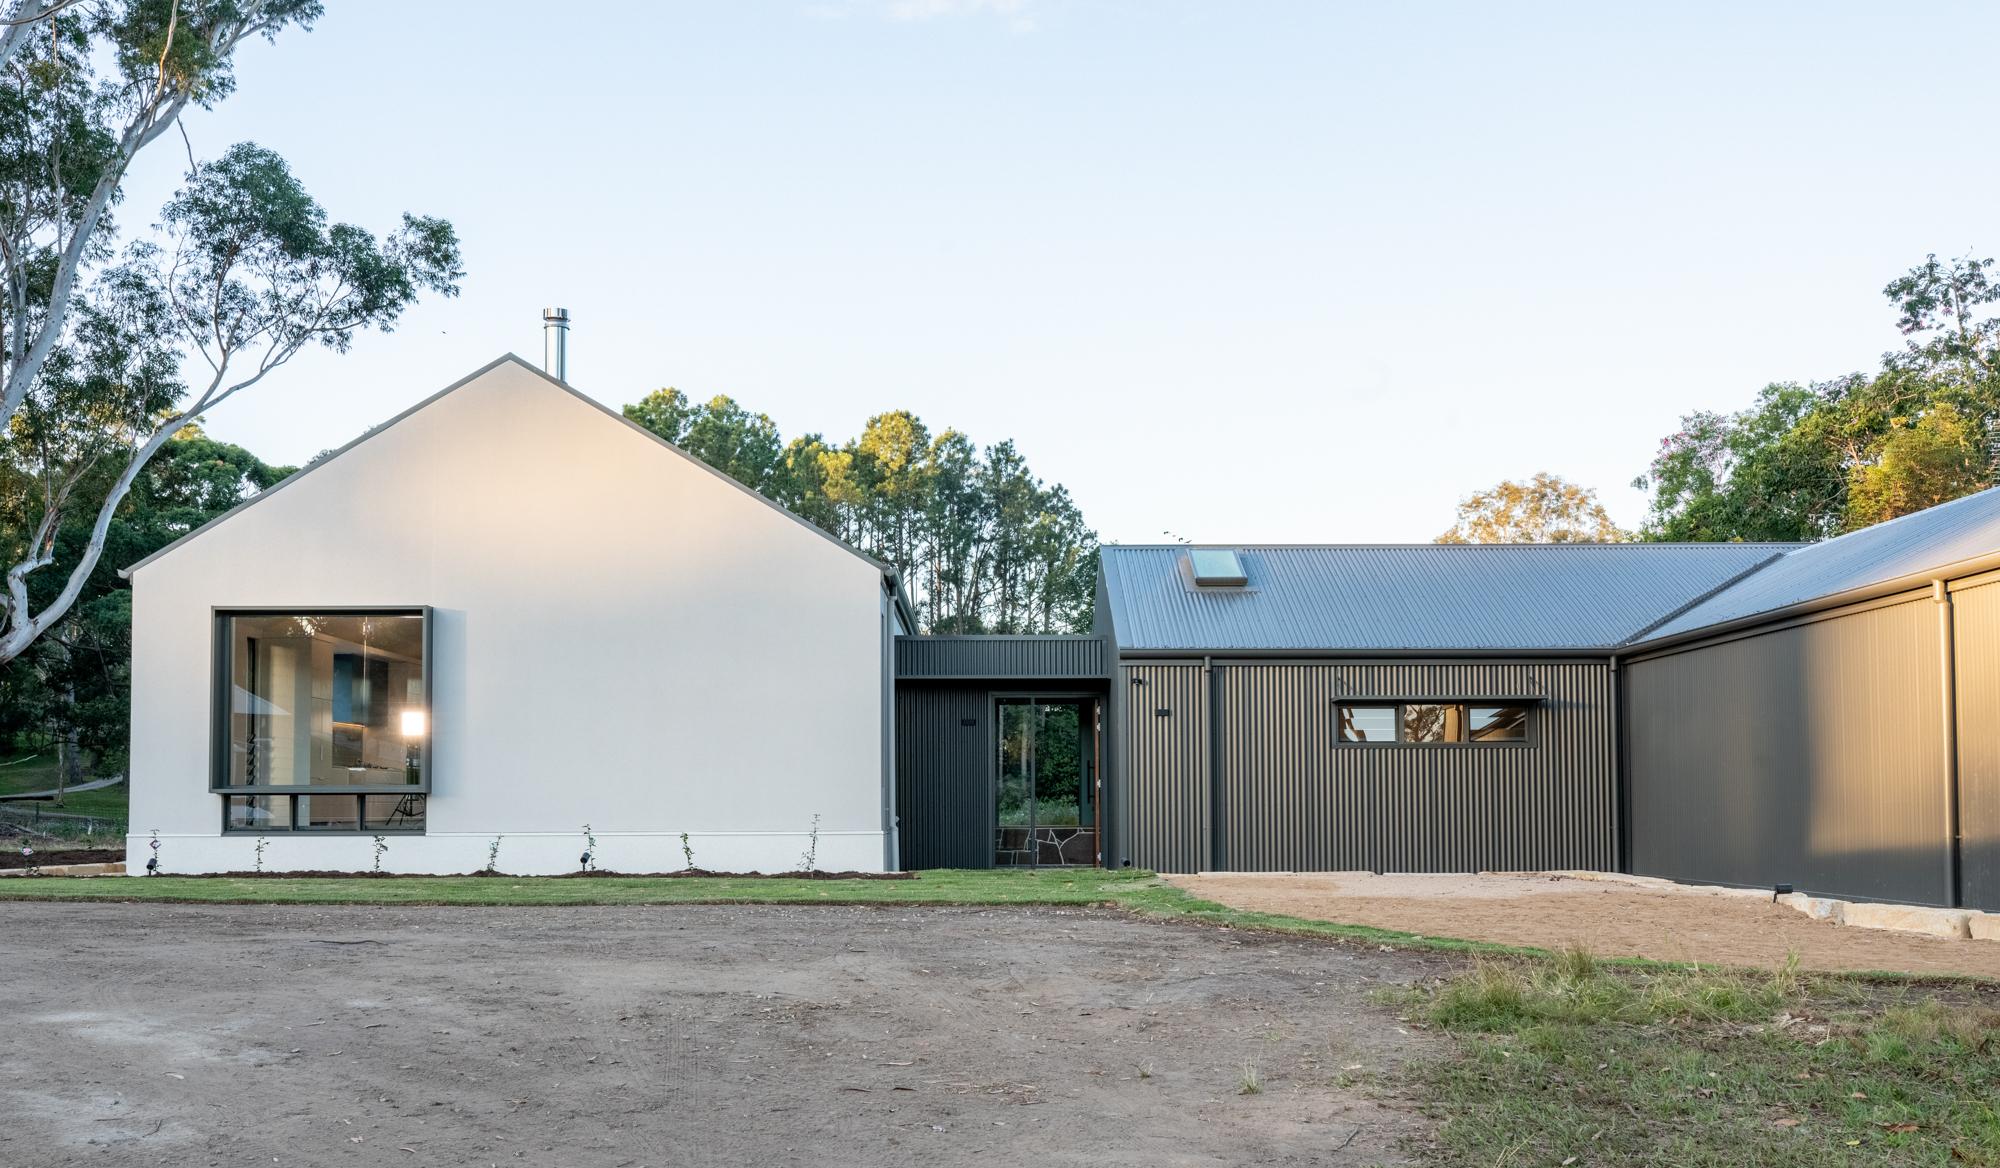 Dominic from Glenview, QLD loves COLORBOND® steel. Roofing, Guttering & Fascia, Garage Doors, Walling made from COLORBOND® steel in colour Woodland Grey® and Monument® Matt